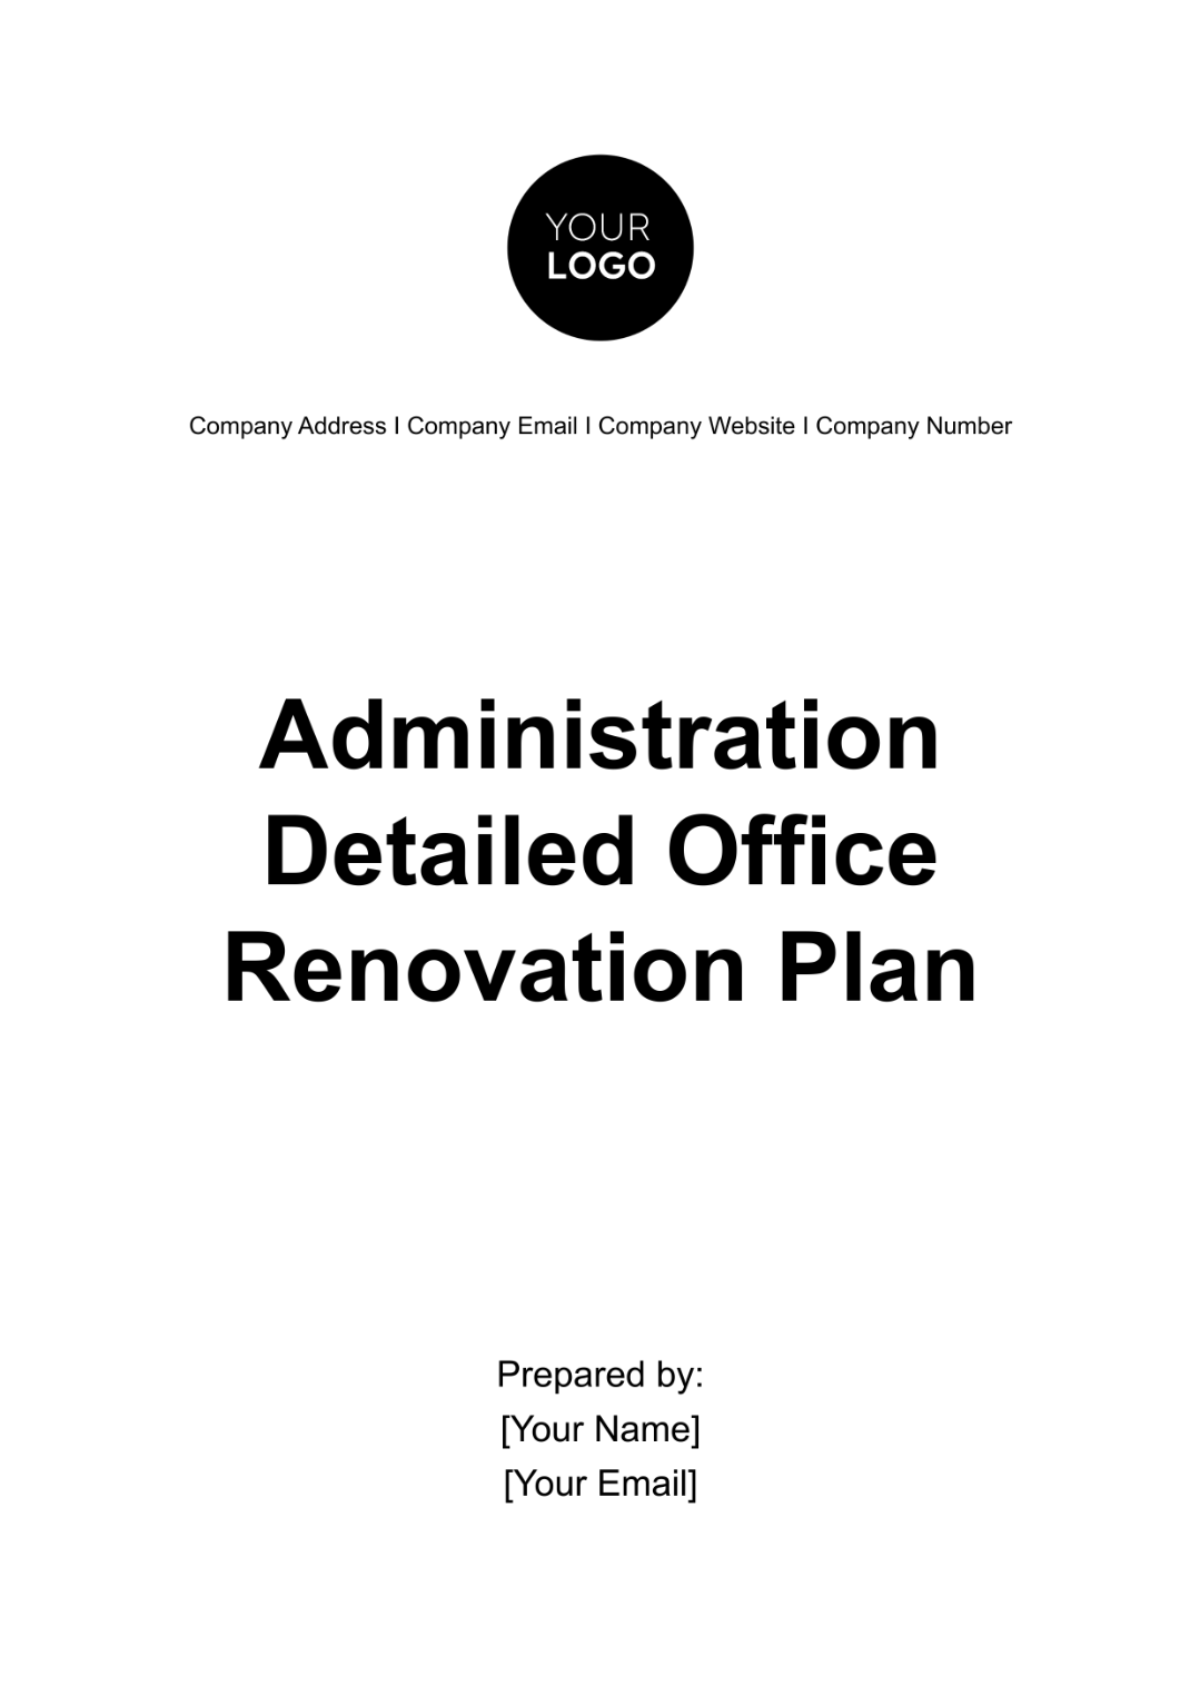 Free Administration Detailed Office Renovation Plan Template